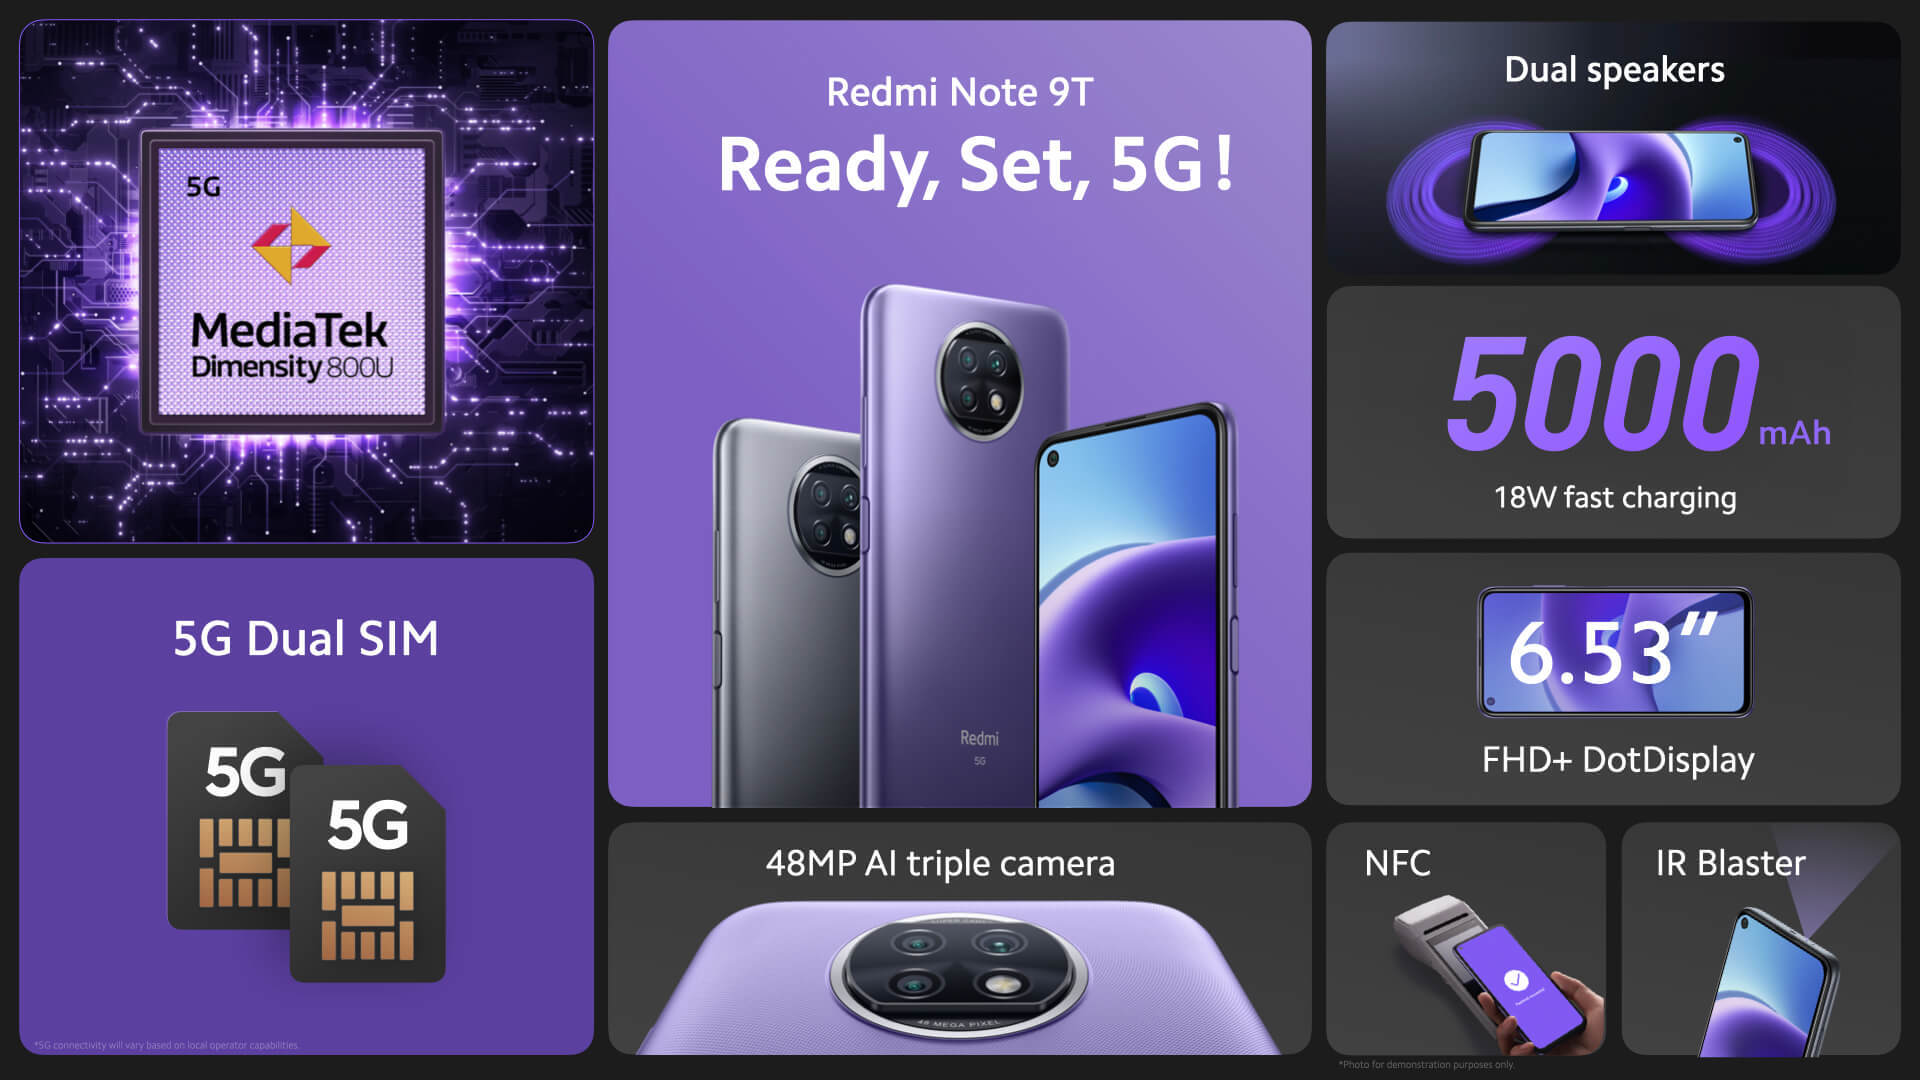 The Redmi 9T & Note 9T 5G are official as Xiaomi's latest budget 